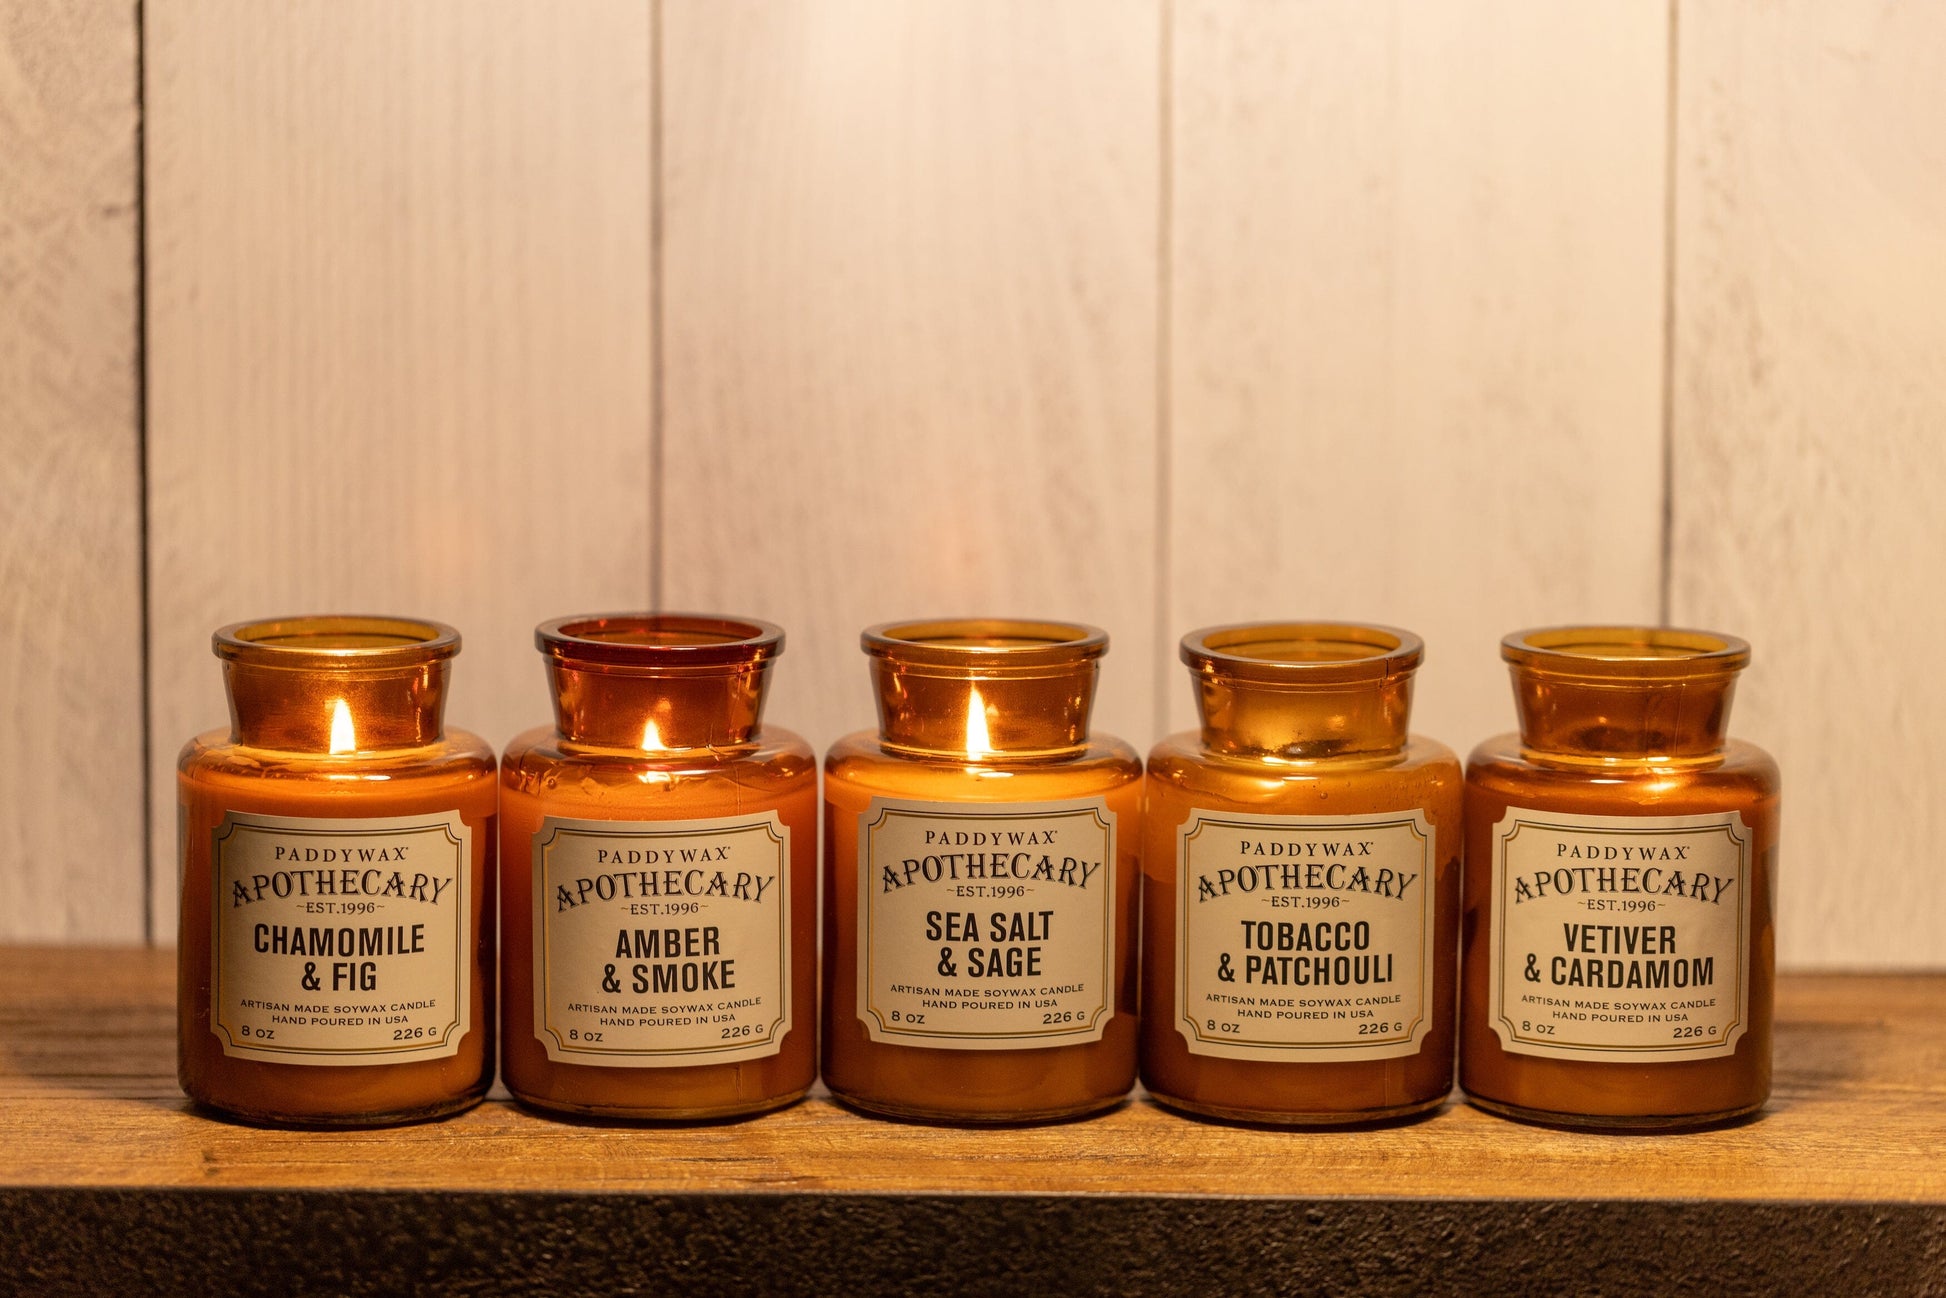 5 of the Apothecary candle line, including Amber & Smoke, on a wooden shelf.  All lit.